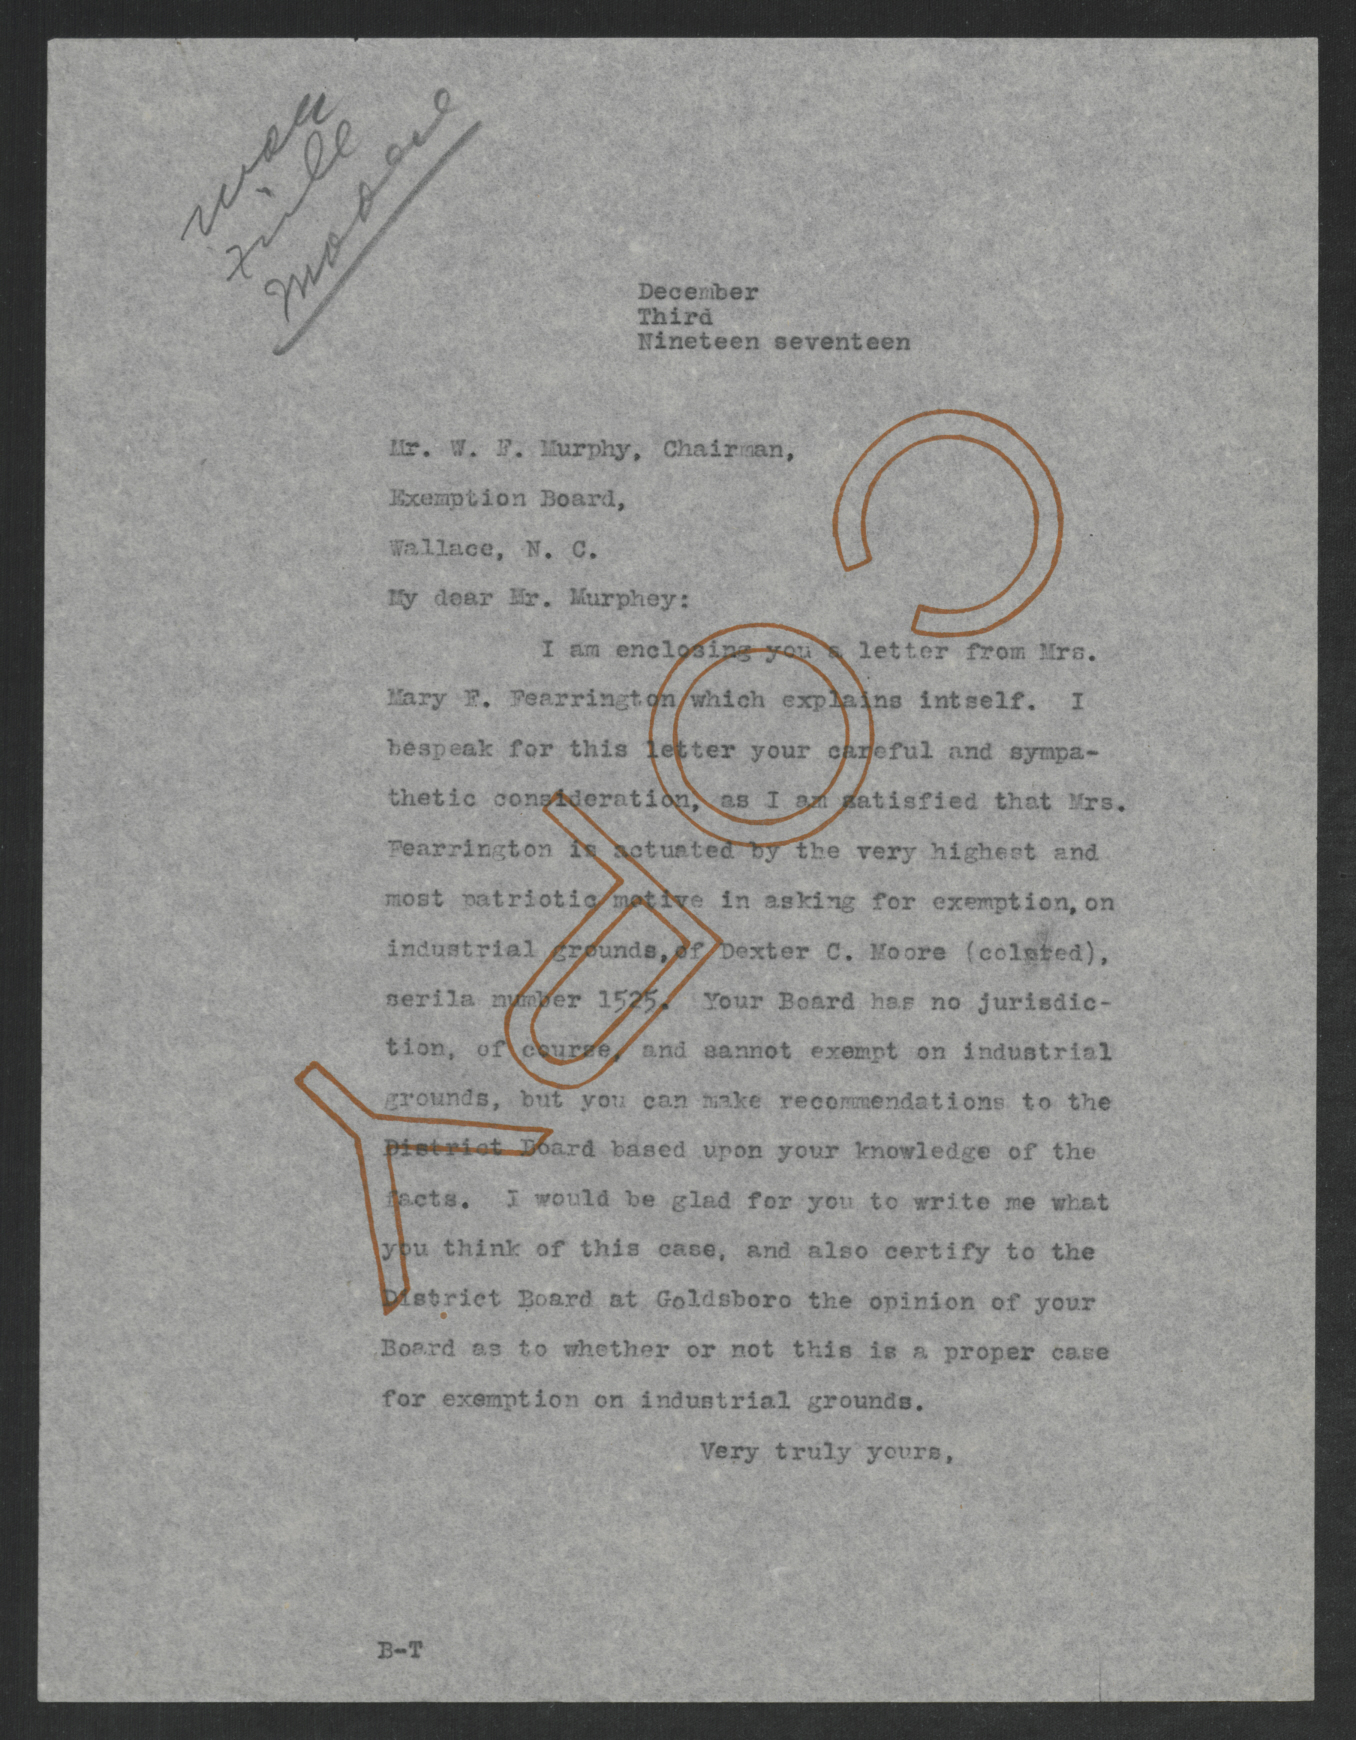 Letter from Thomas W. Bickett to William F. Murphy, December 3, 1917